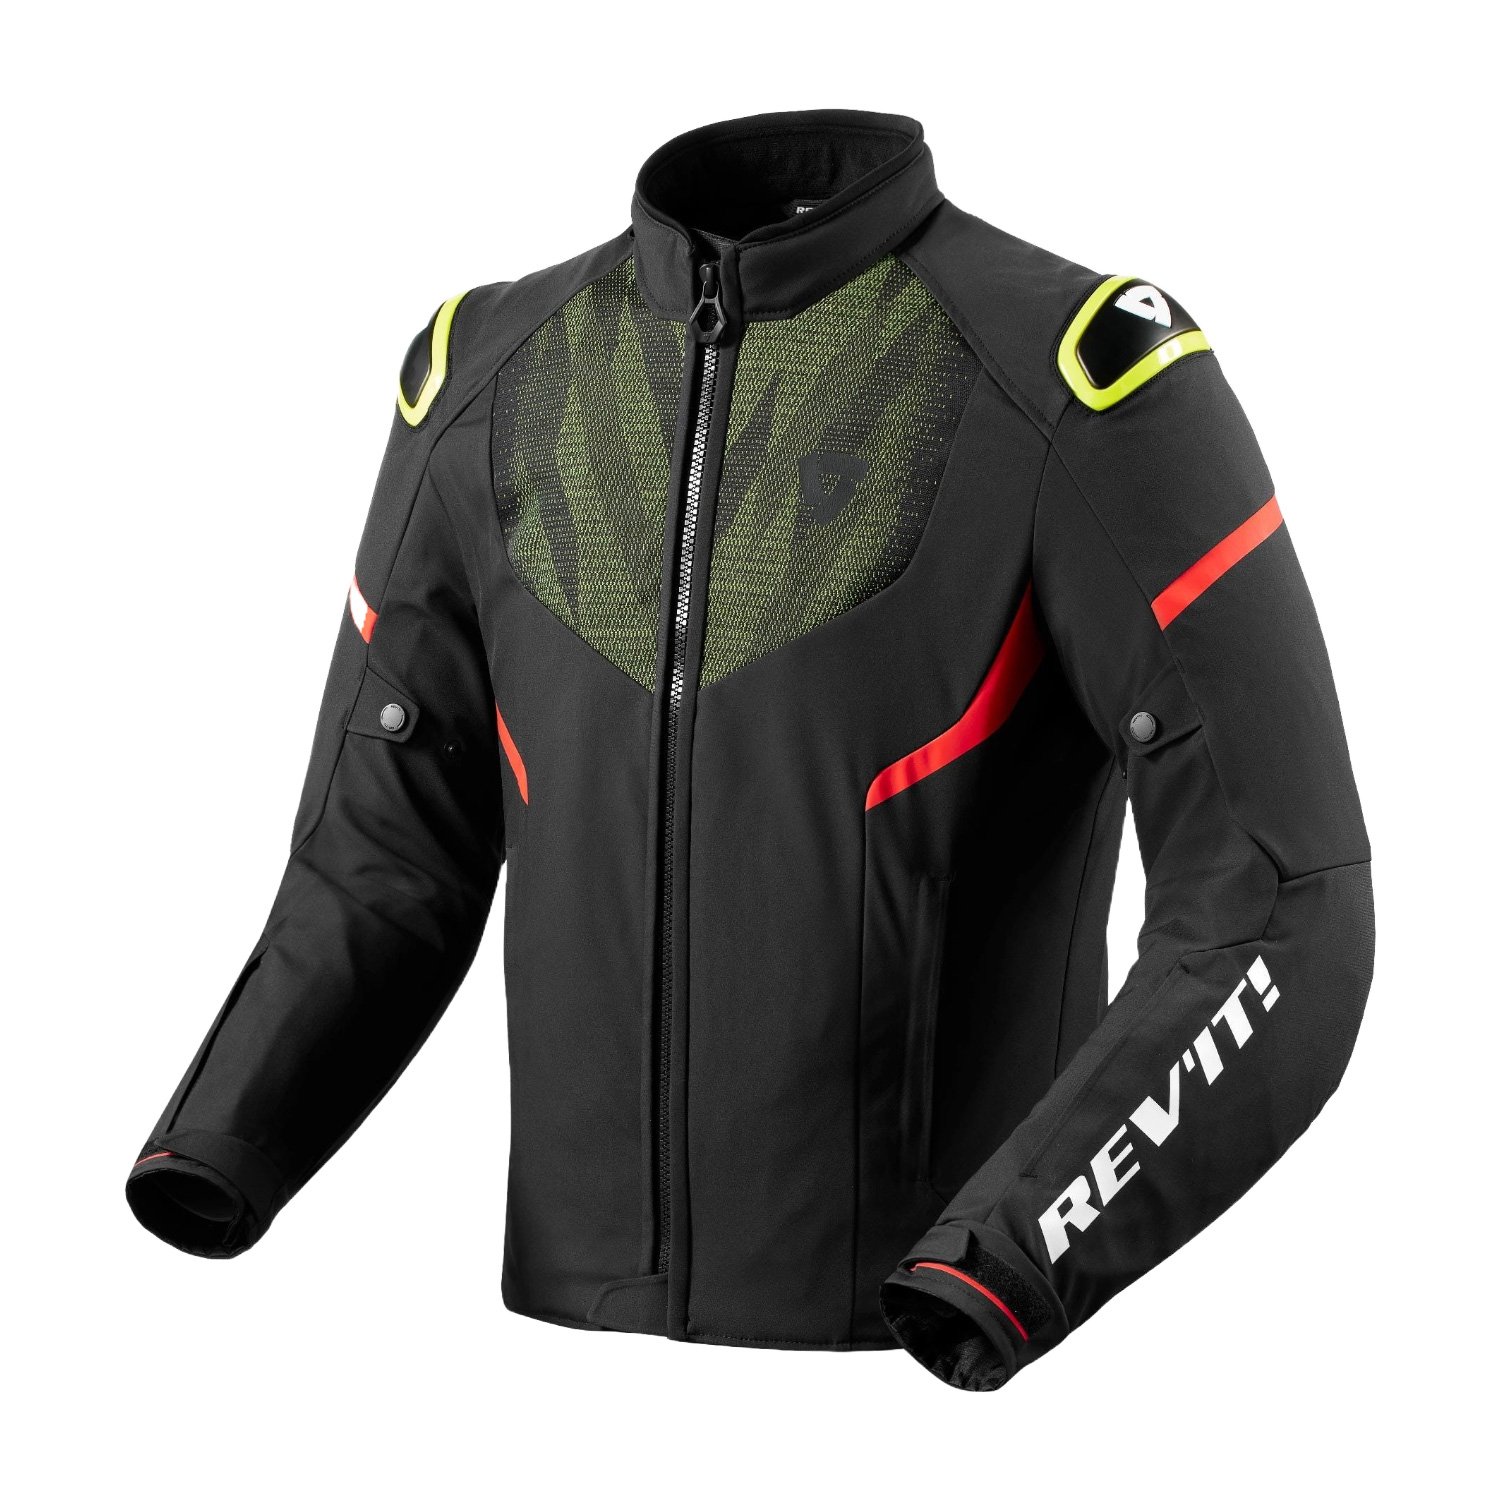 Image of REV'IT! Hyperspeed 2 H2O Jacket Black Neon Yellow Size 2XL ID 8700001367387